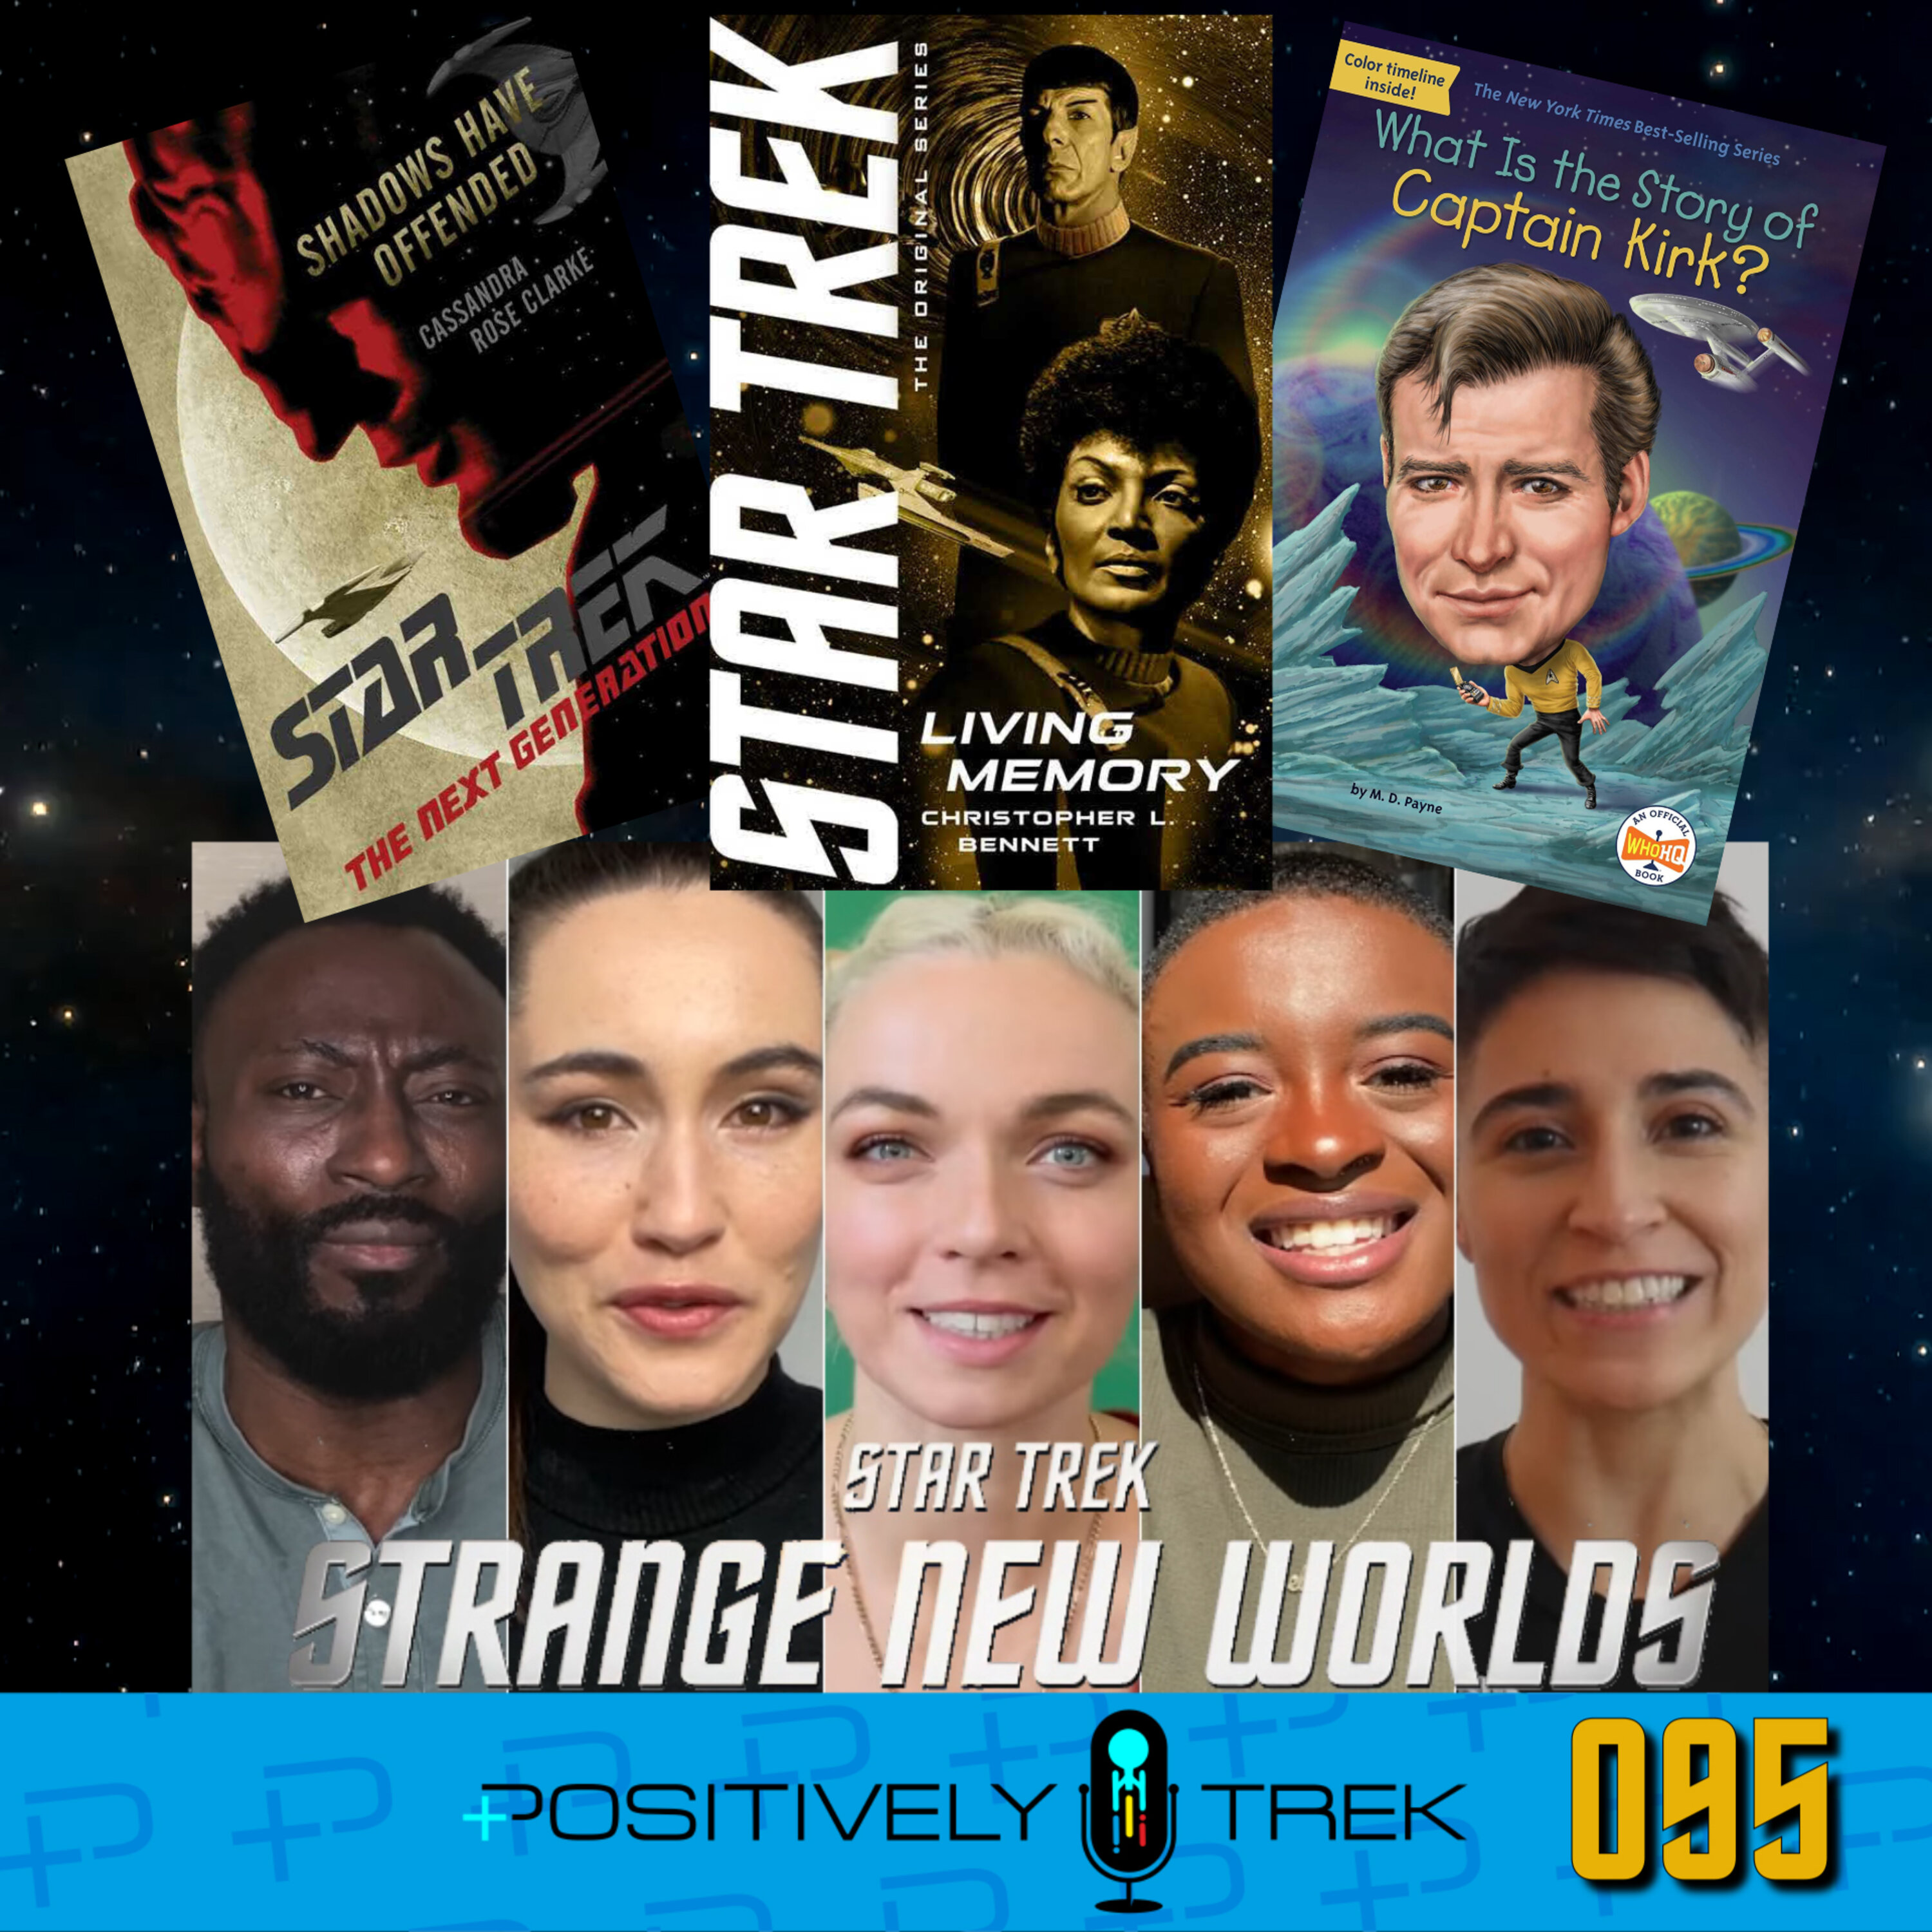 Casting Announcements for Strange New Worlds! Image